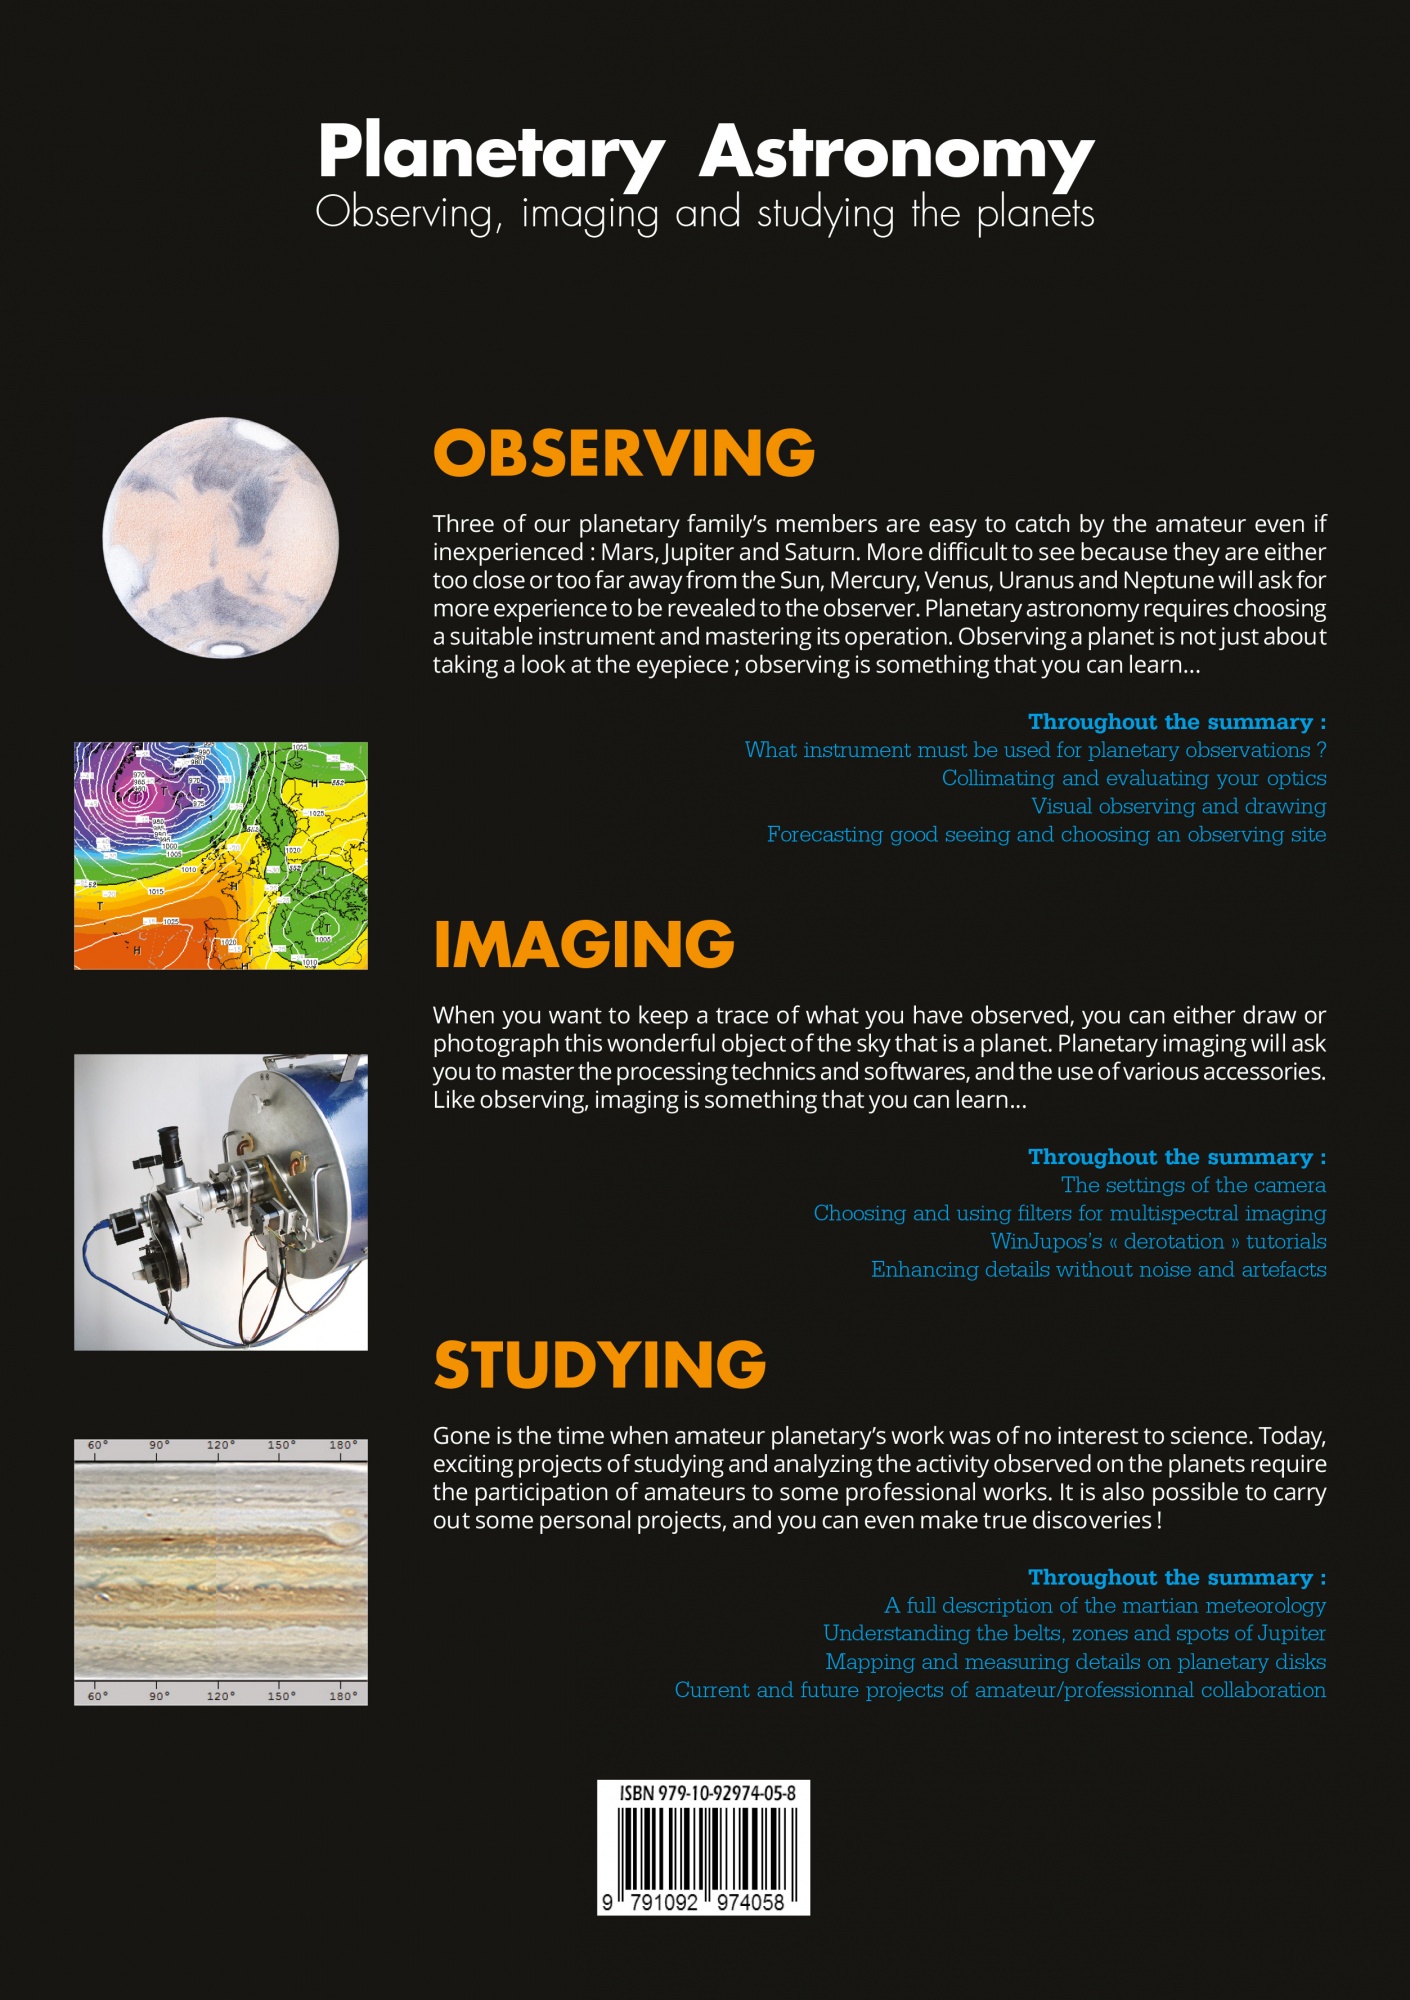 Planetary Astronomy Book - Observing, imaging and studying the planets ...